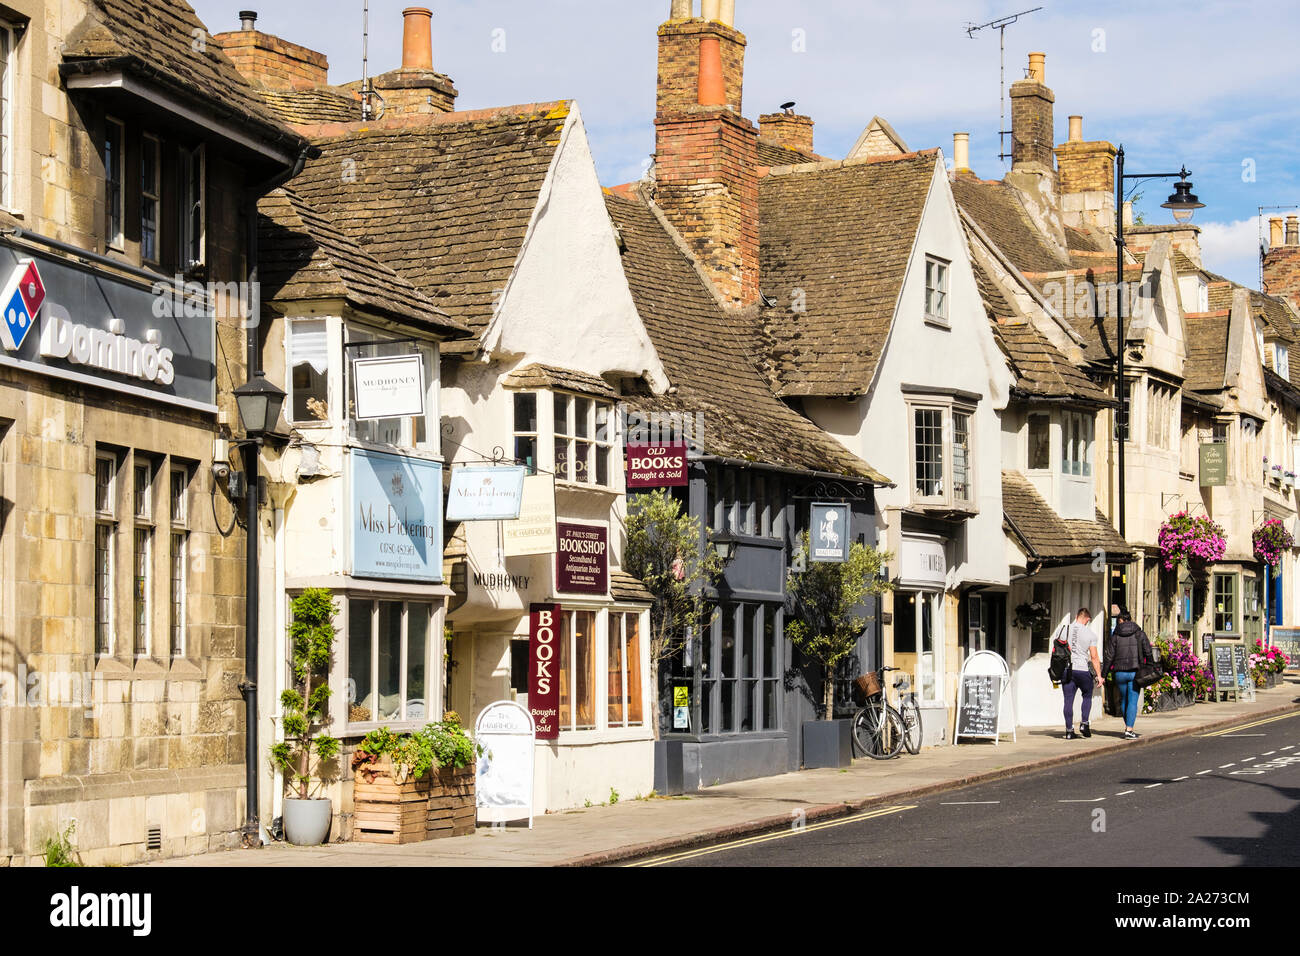 Small shops and cafes in quaint old buildings in pretty historic town centre. St Paul's Street Stamford Lincolnshire England UK Britain Stock Photo